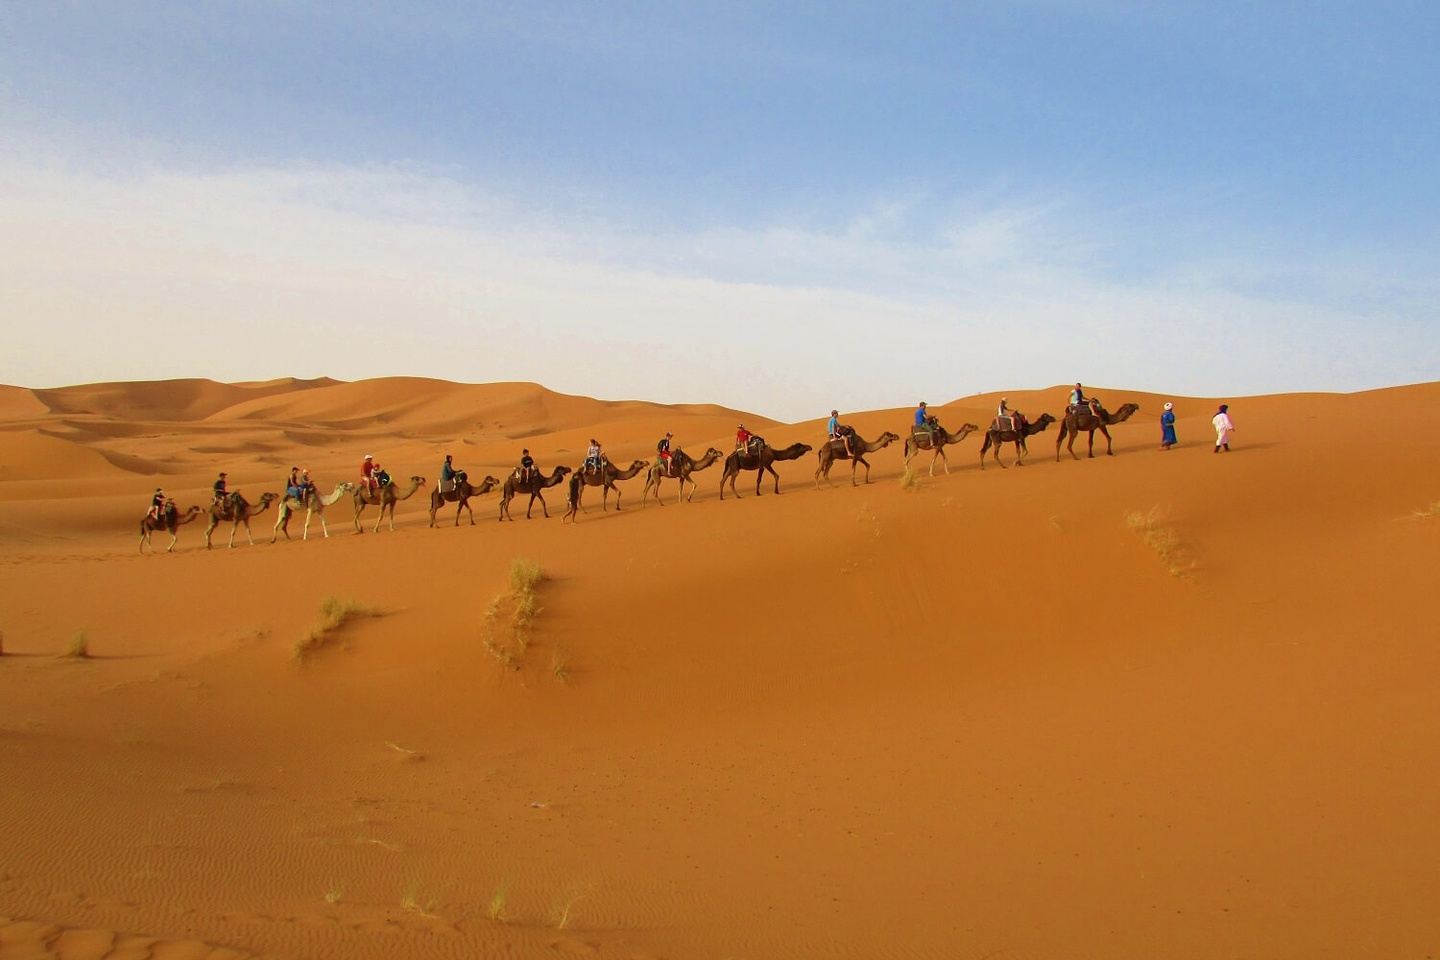 Morocco: Imperial Cities and Desert Trip!